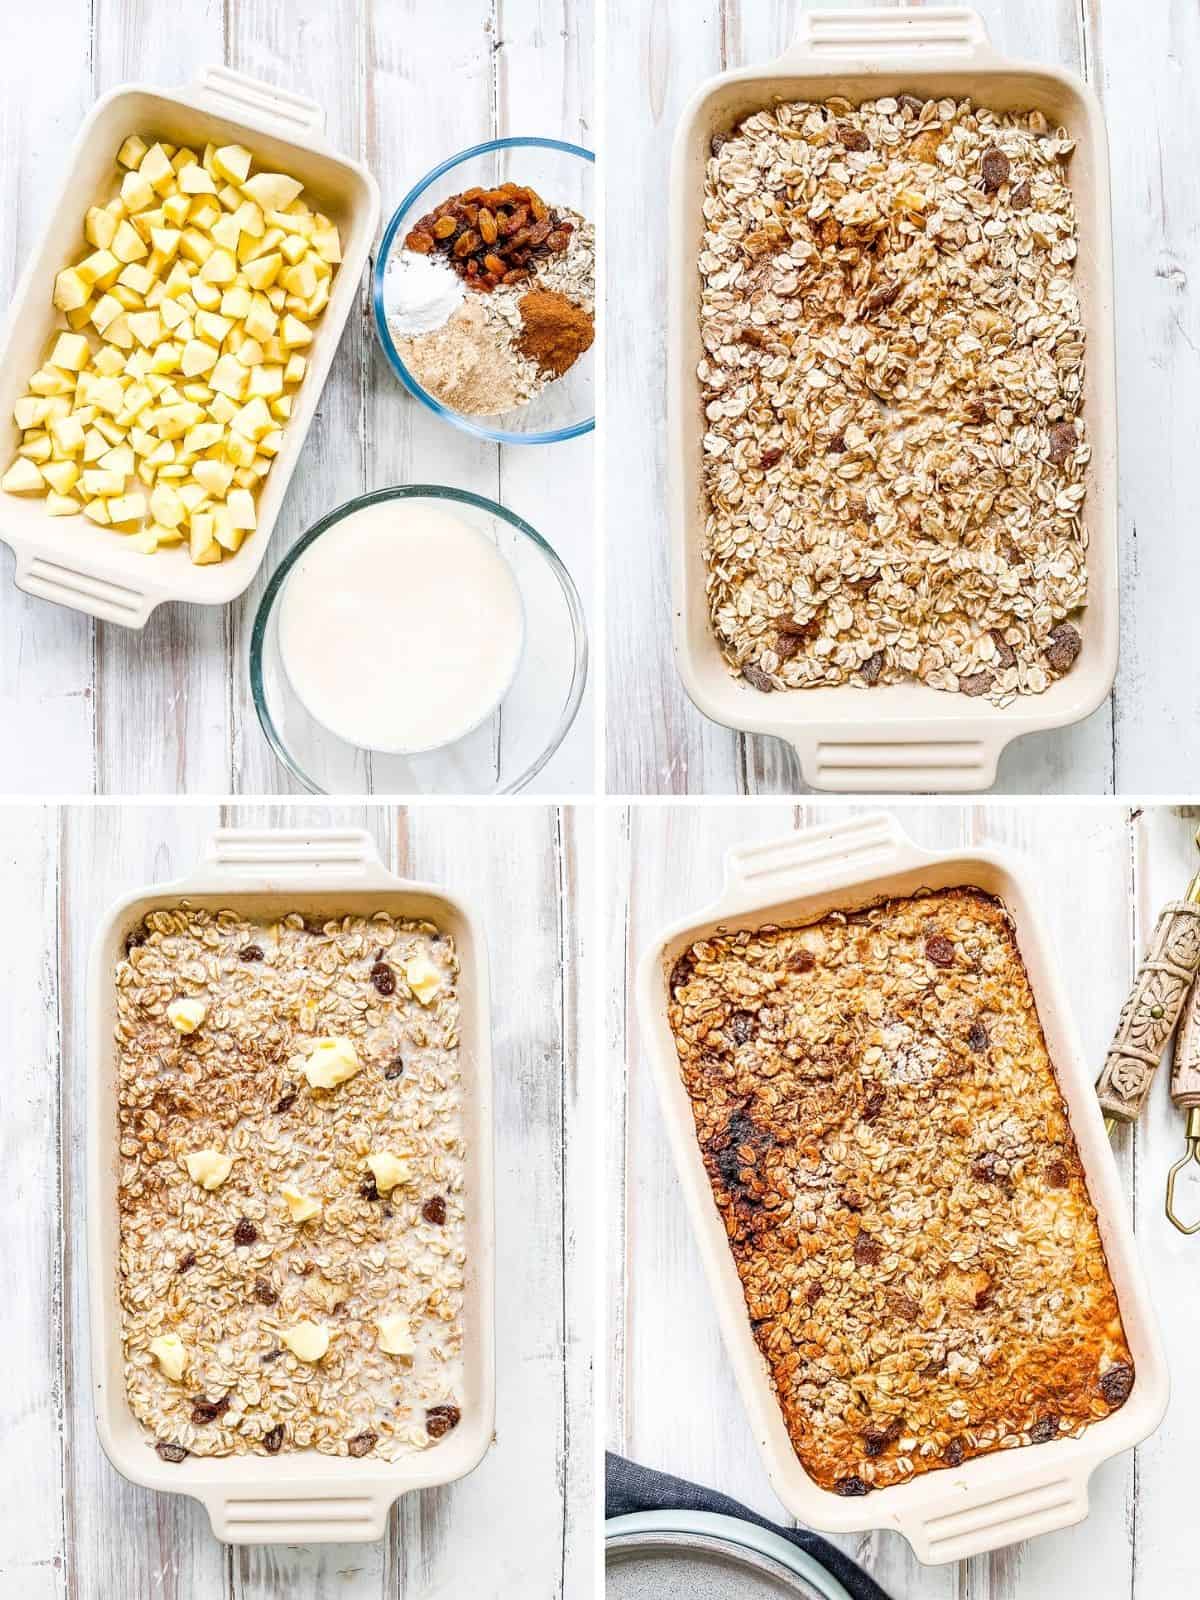 4 pictures of the process of making baked oatmeal with apples.